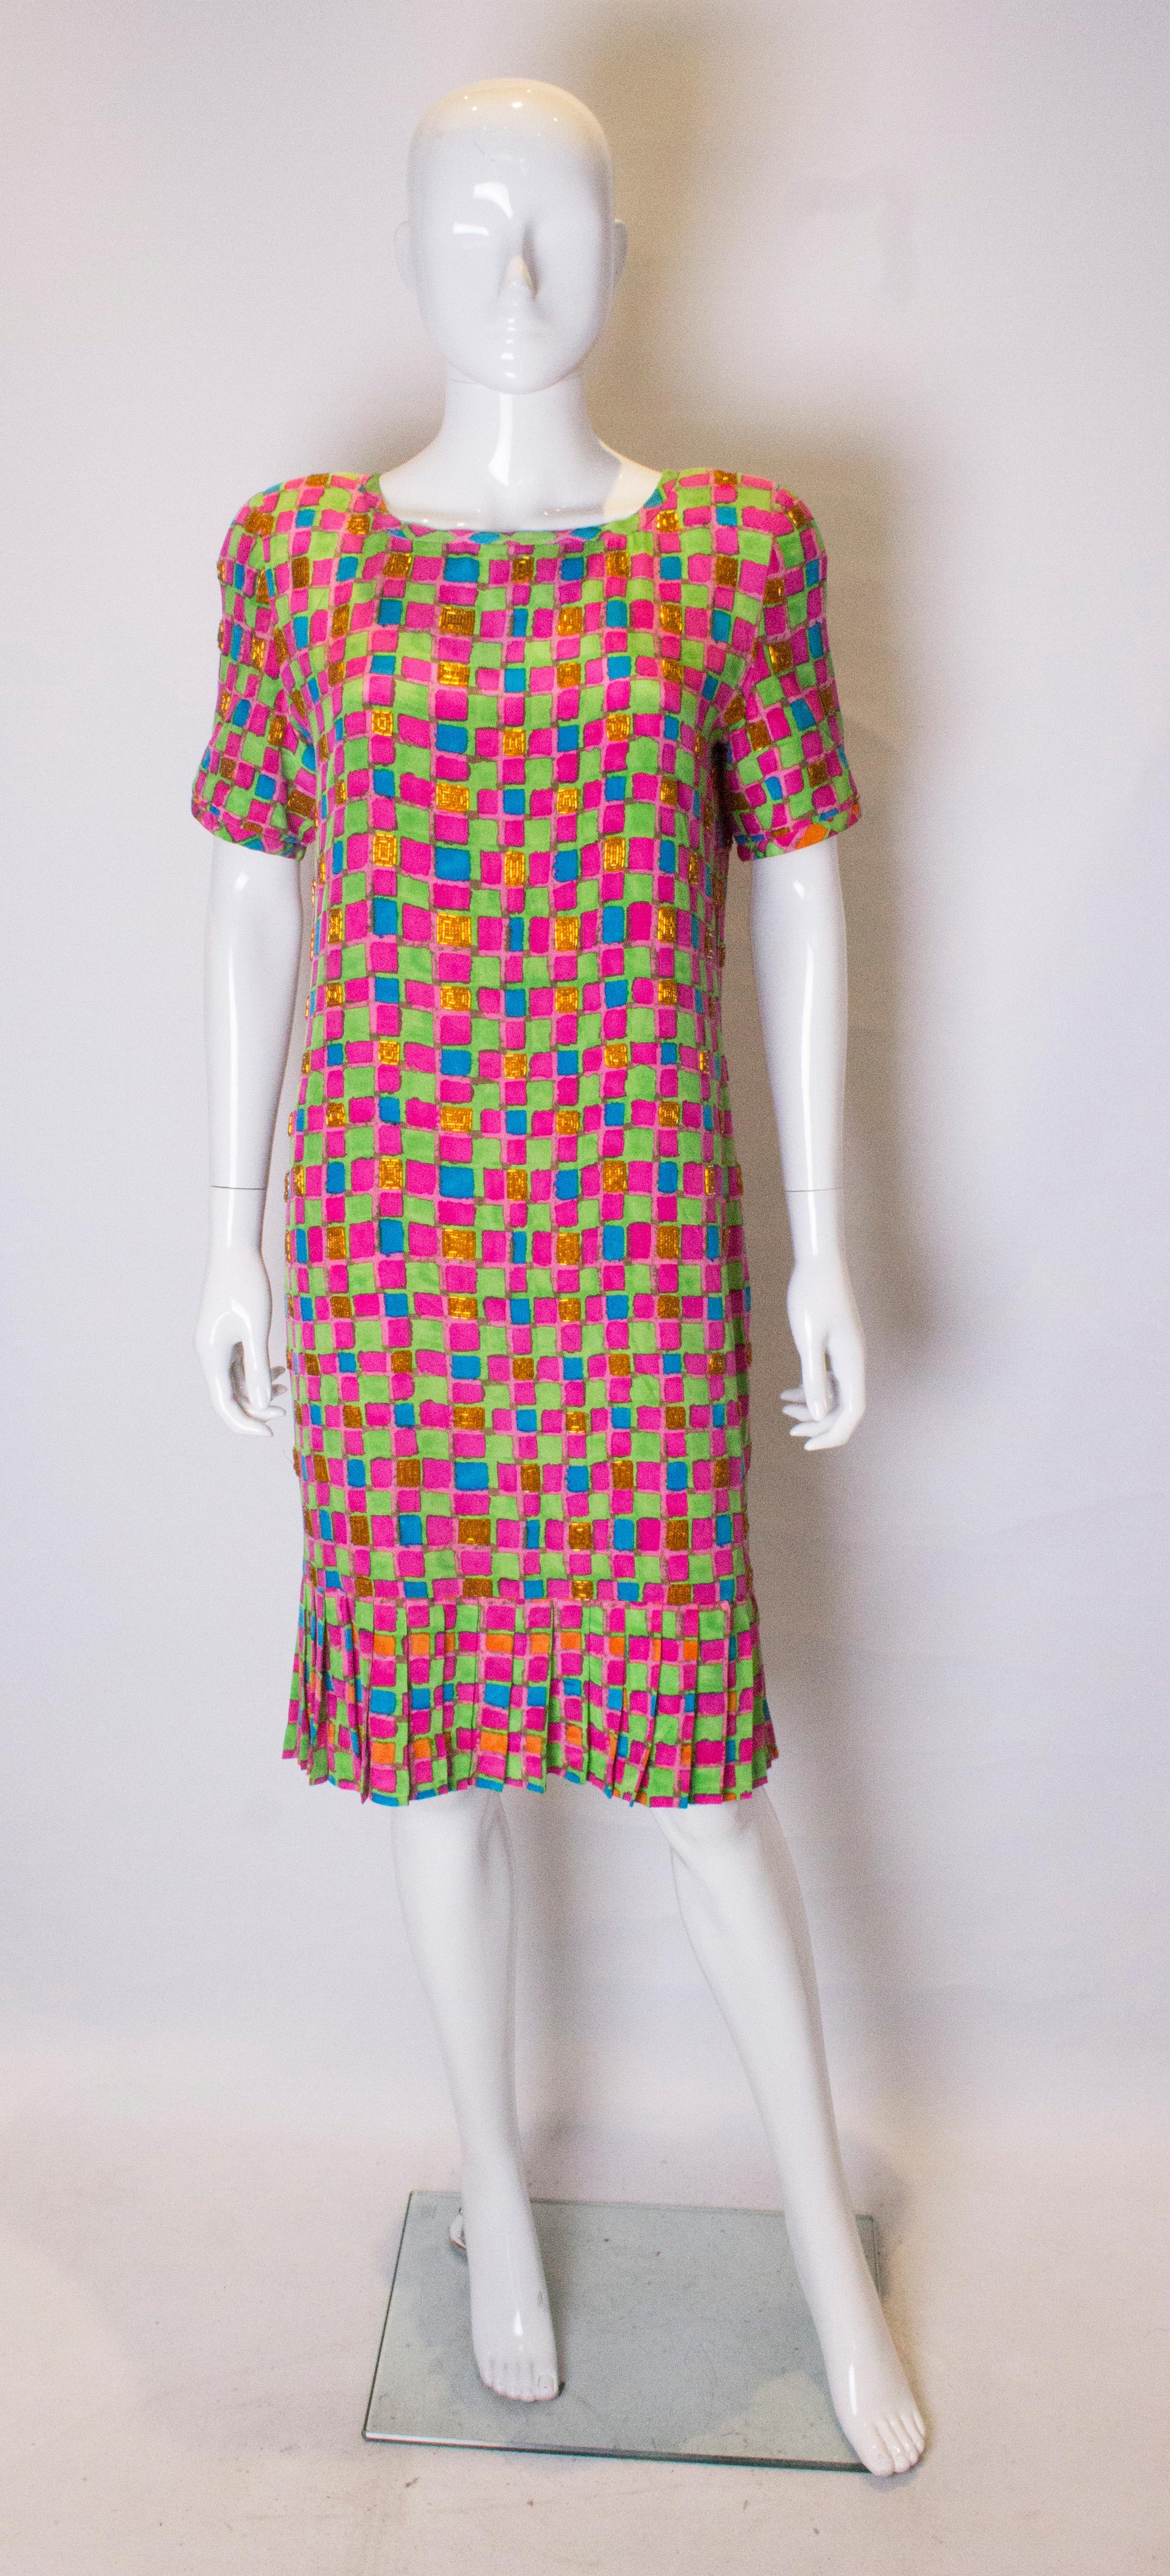 A chic and colourful dress by Bill Blass. The dress is in a colourful print of pink,blue,green and orange with bead decortaion. It has a drop waist and pleats at the hem. It is fully lined with a central back zip.